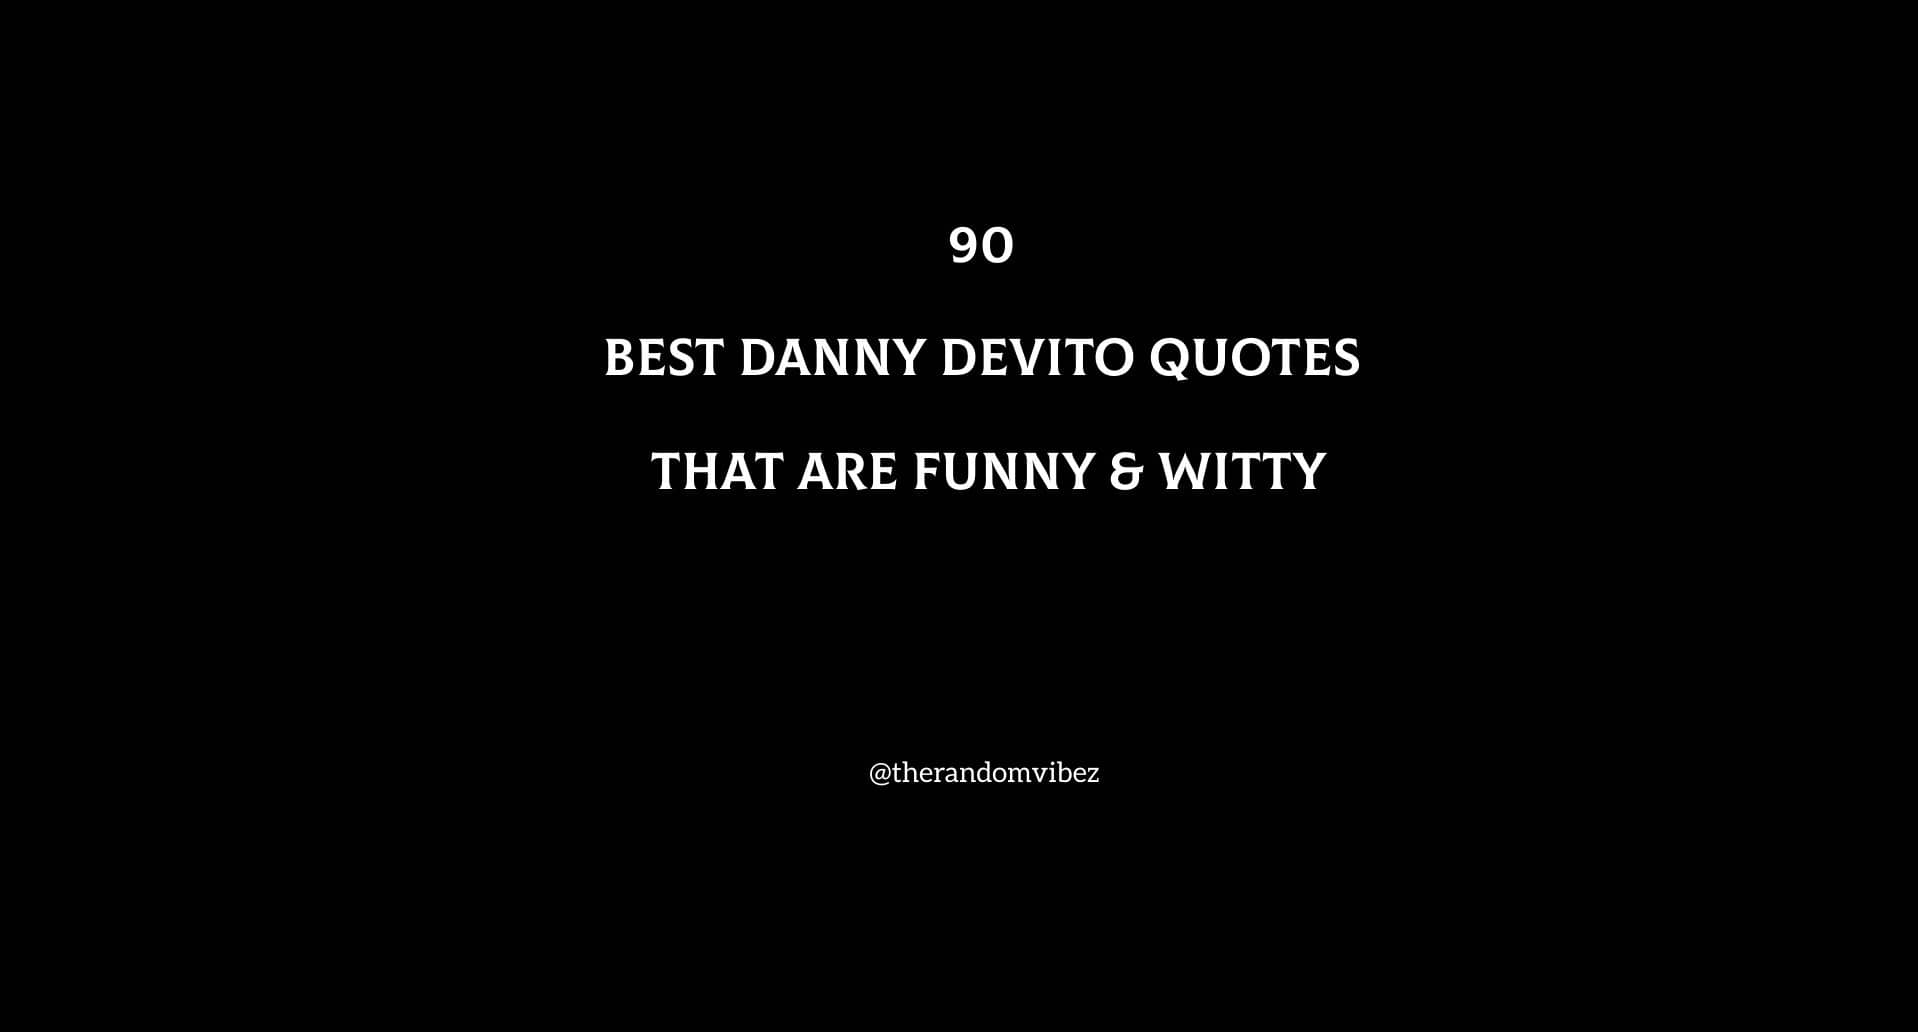 90 Best Danny DeVito Quotes That Are Funny & Witty